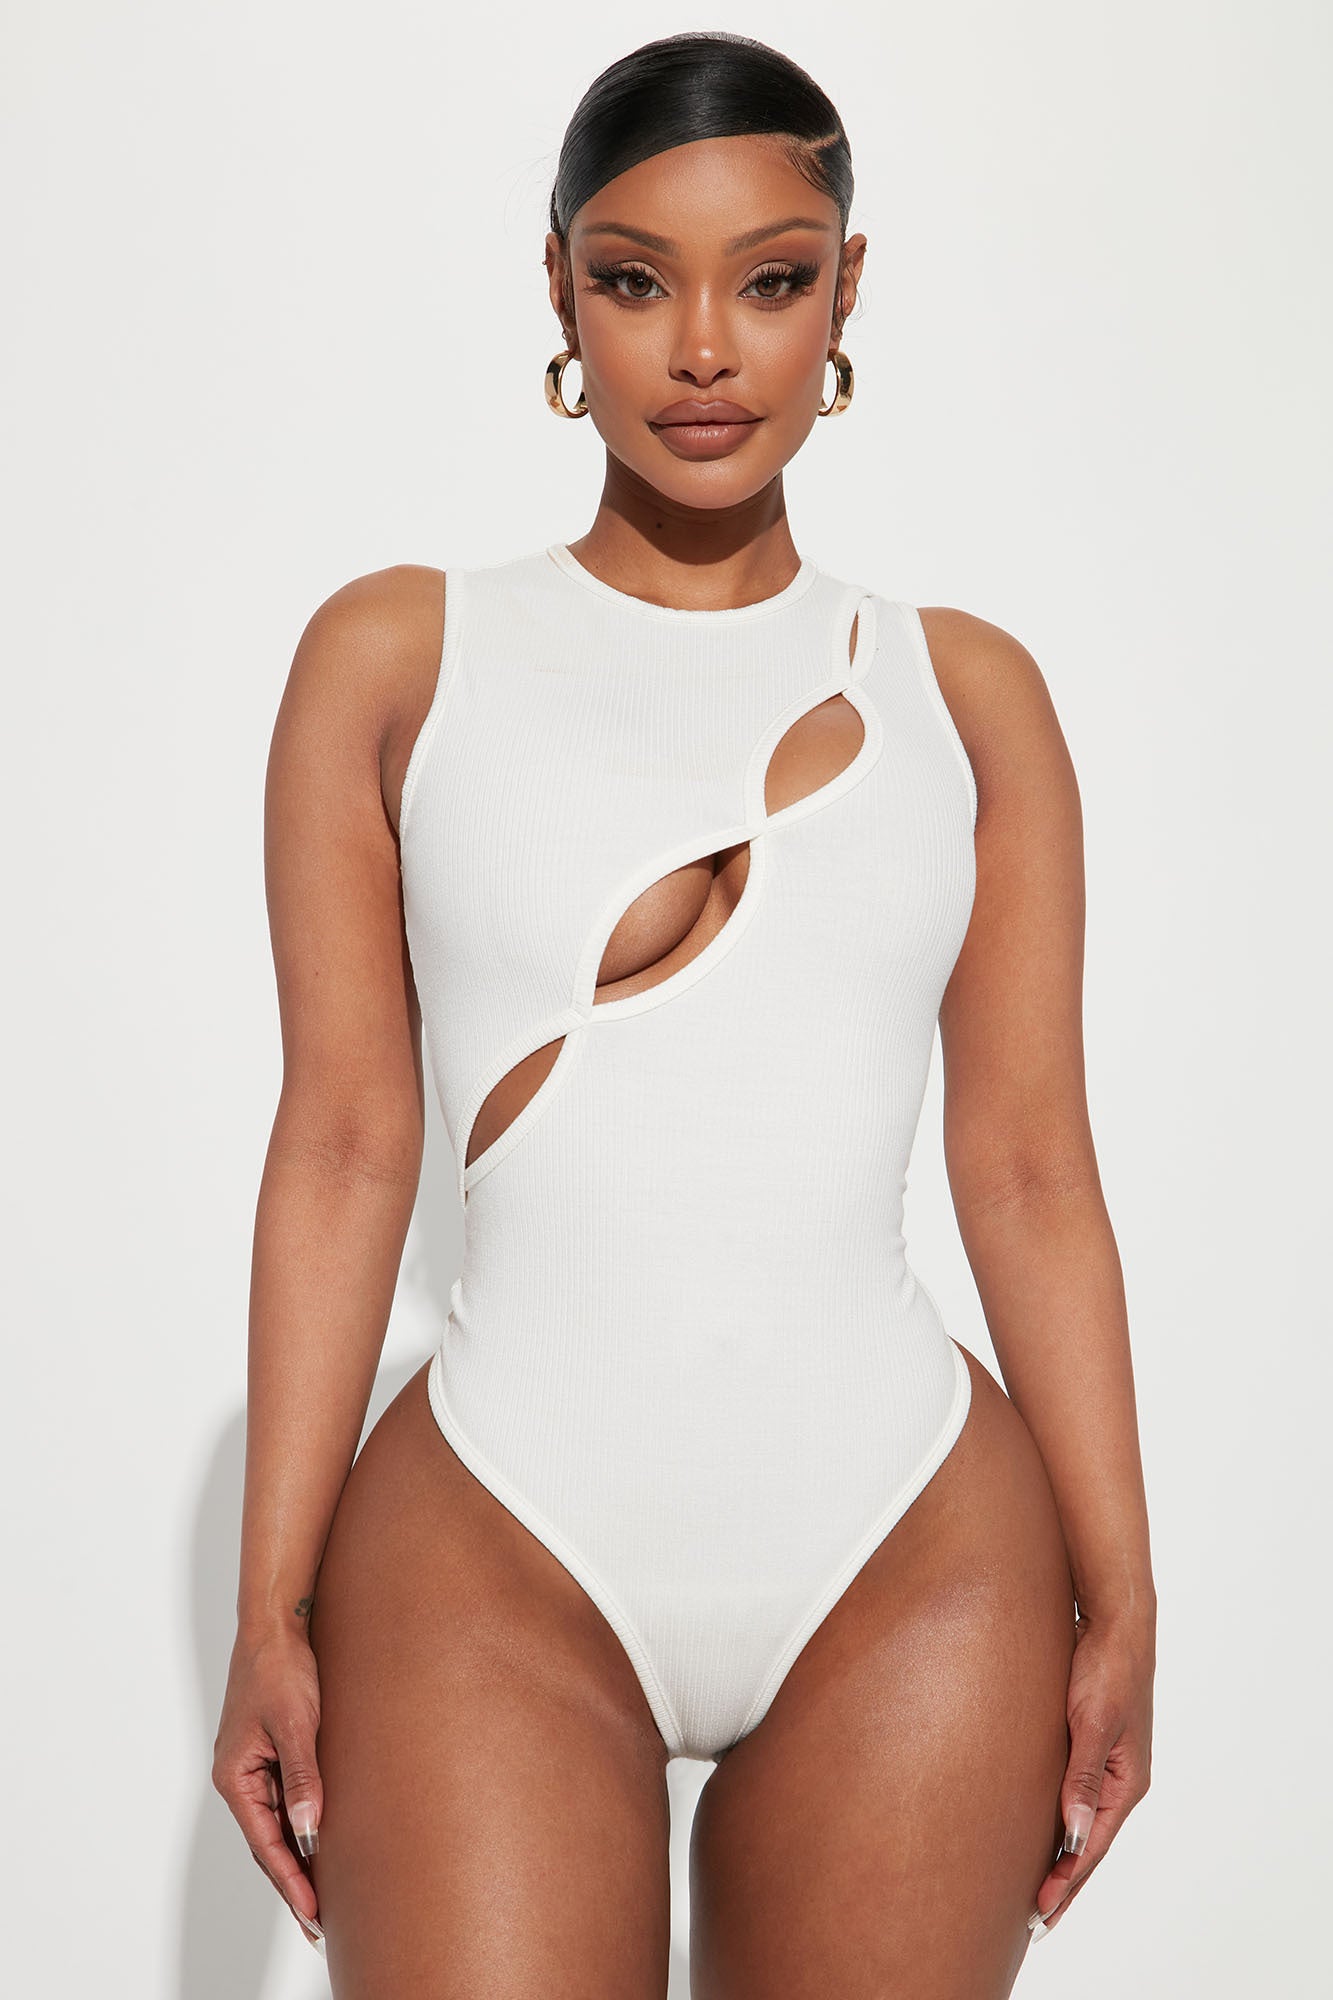  Other Stories high neck cut out bodysuit in black - BEIGE